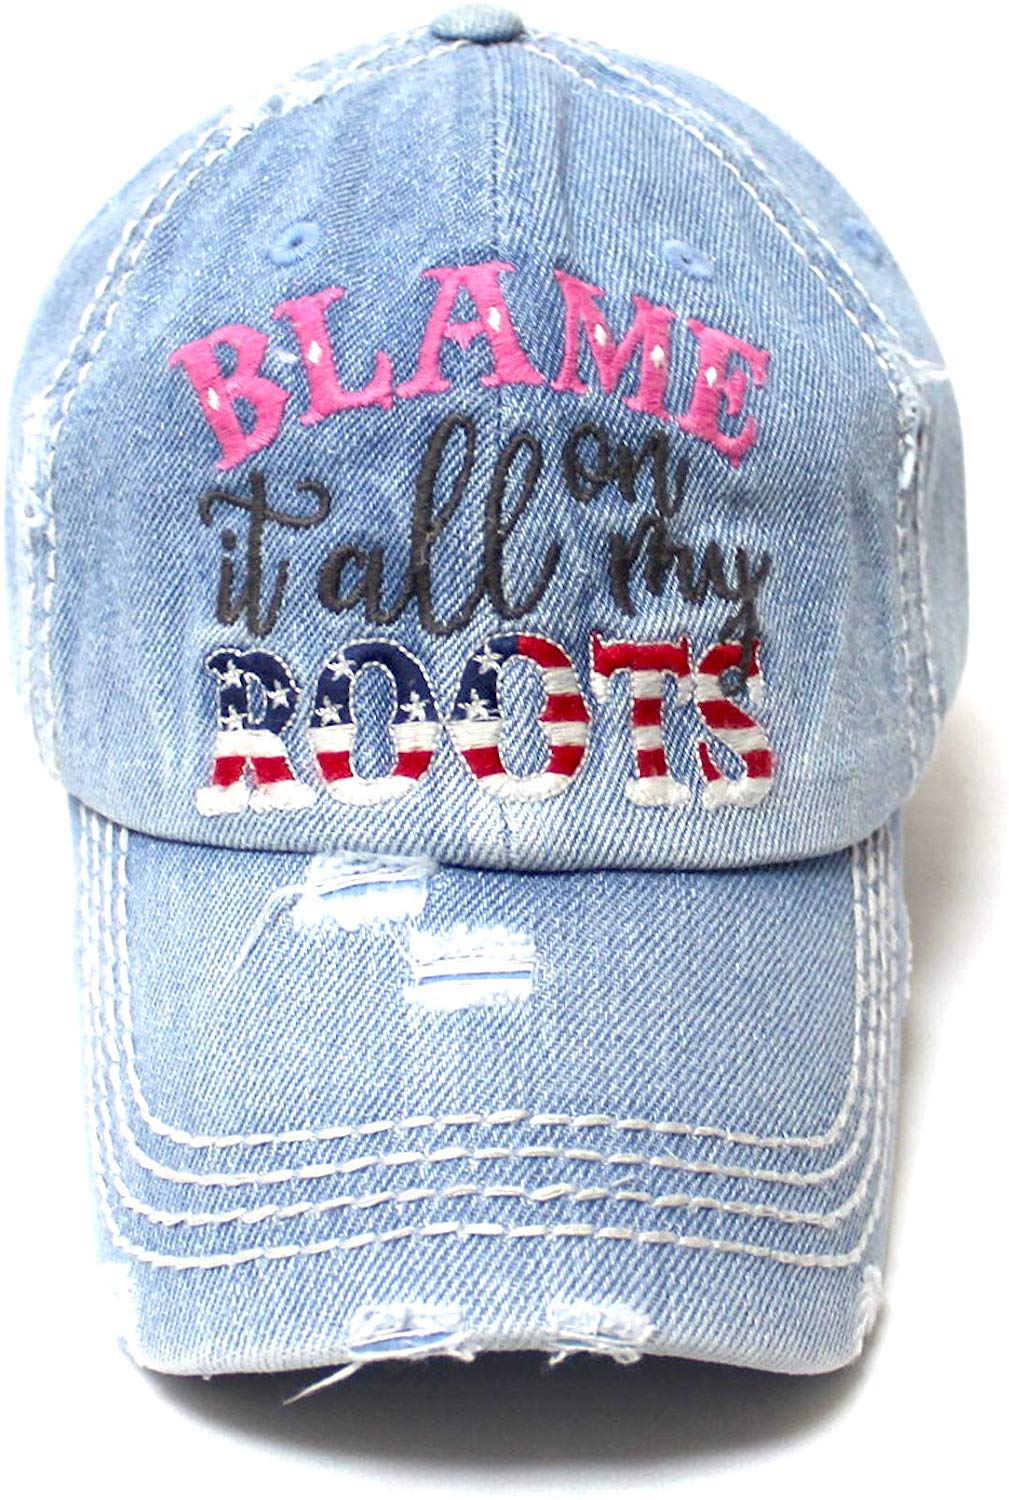 Classic Ballcap Blame it All on My Roots Monogram Embroidery USA Flag Themed Hat, Denim Blue - Caps 'N Vintage 